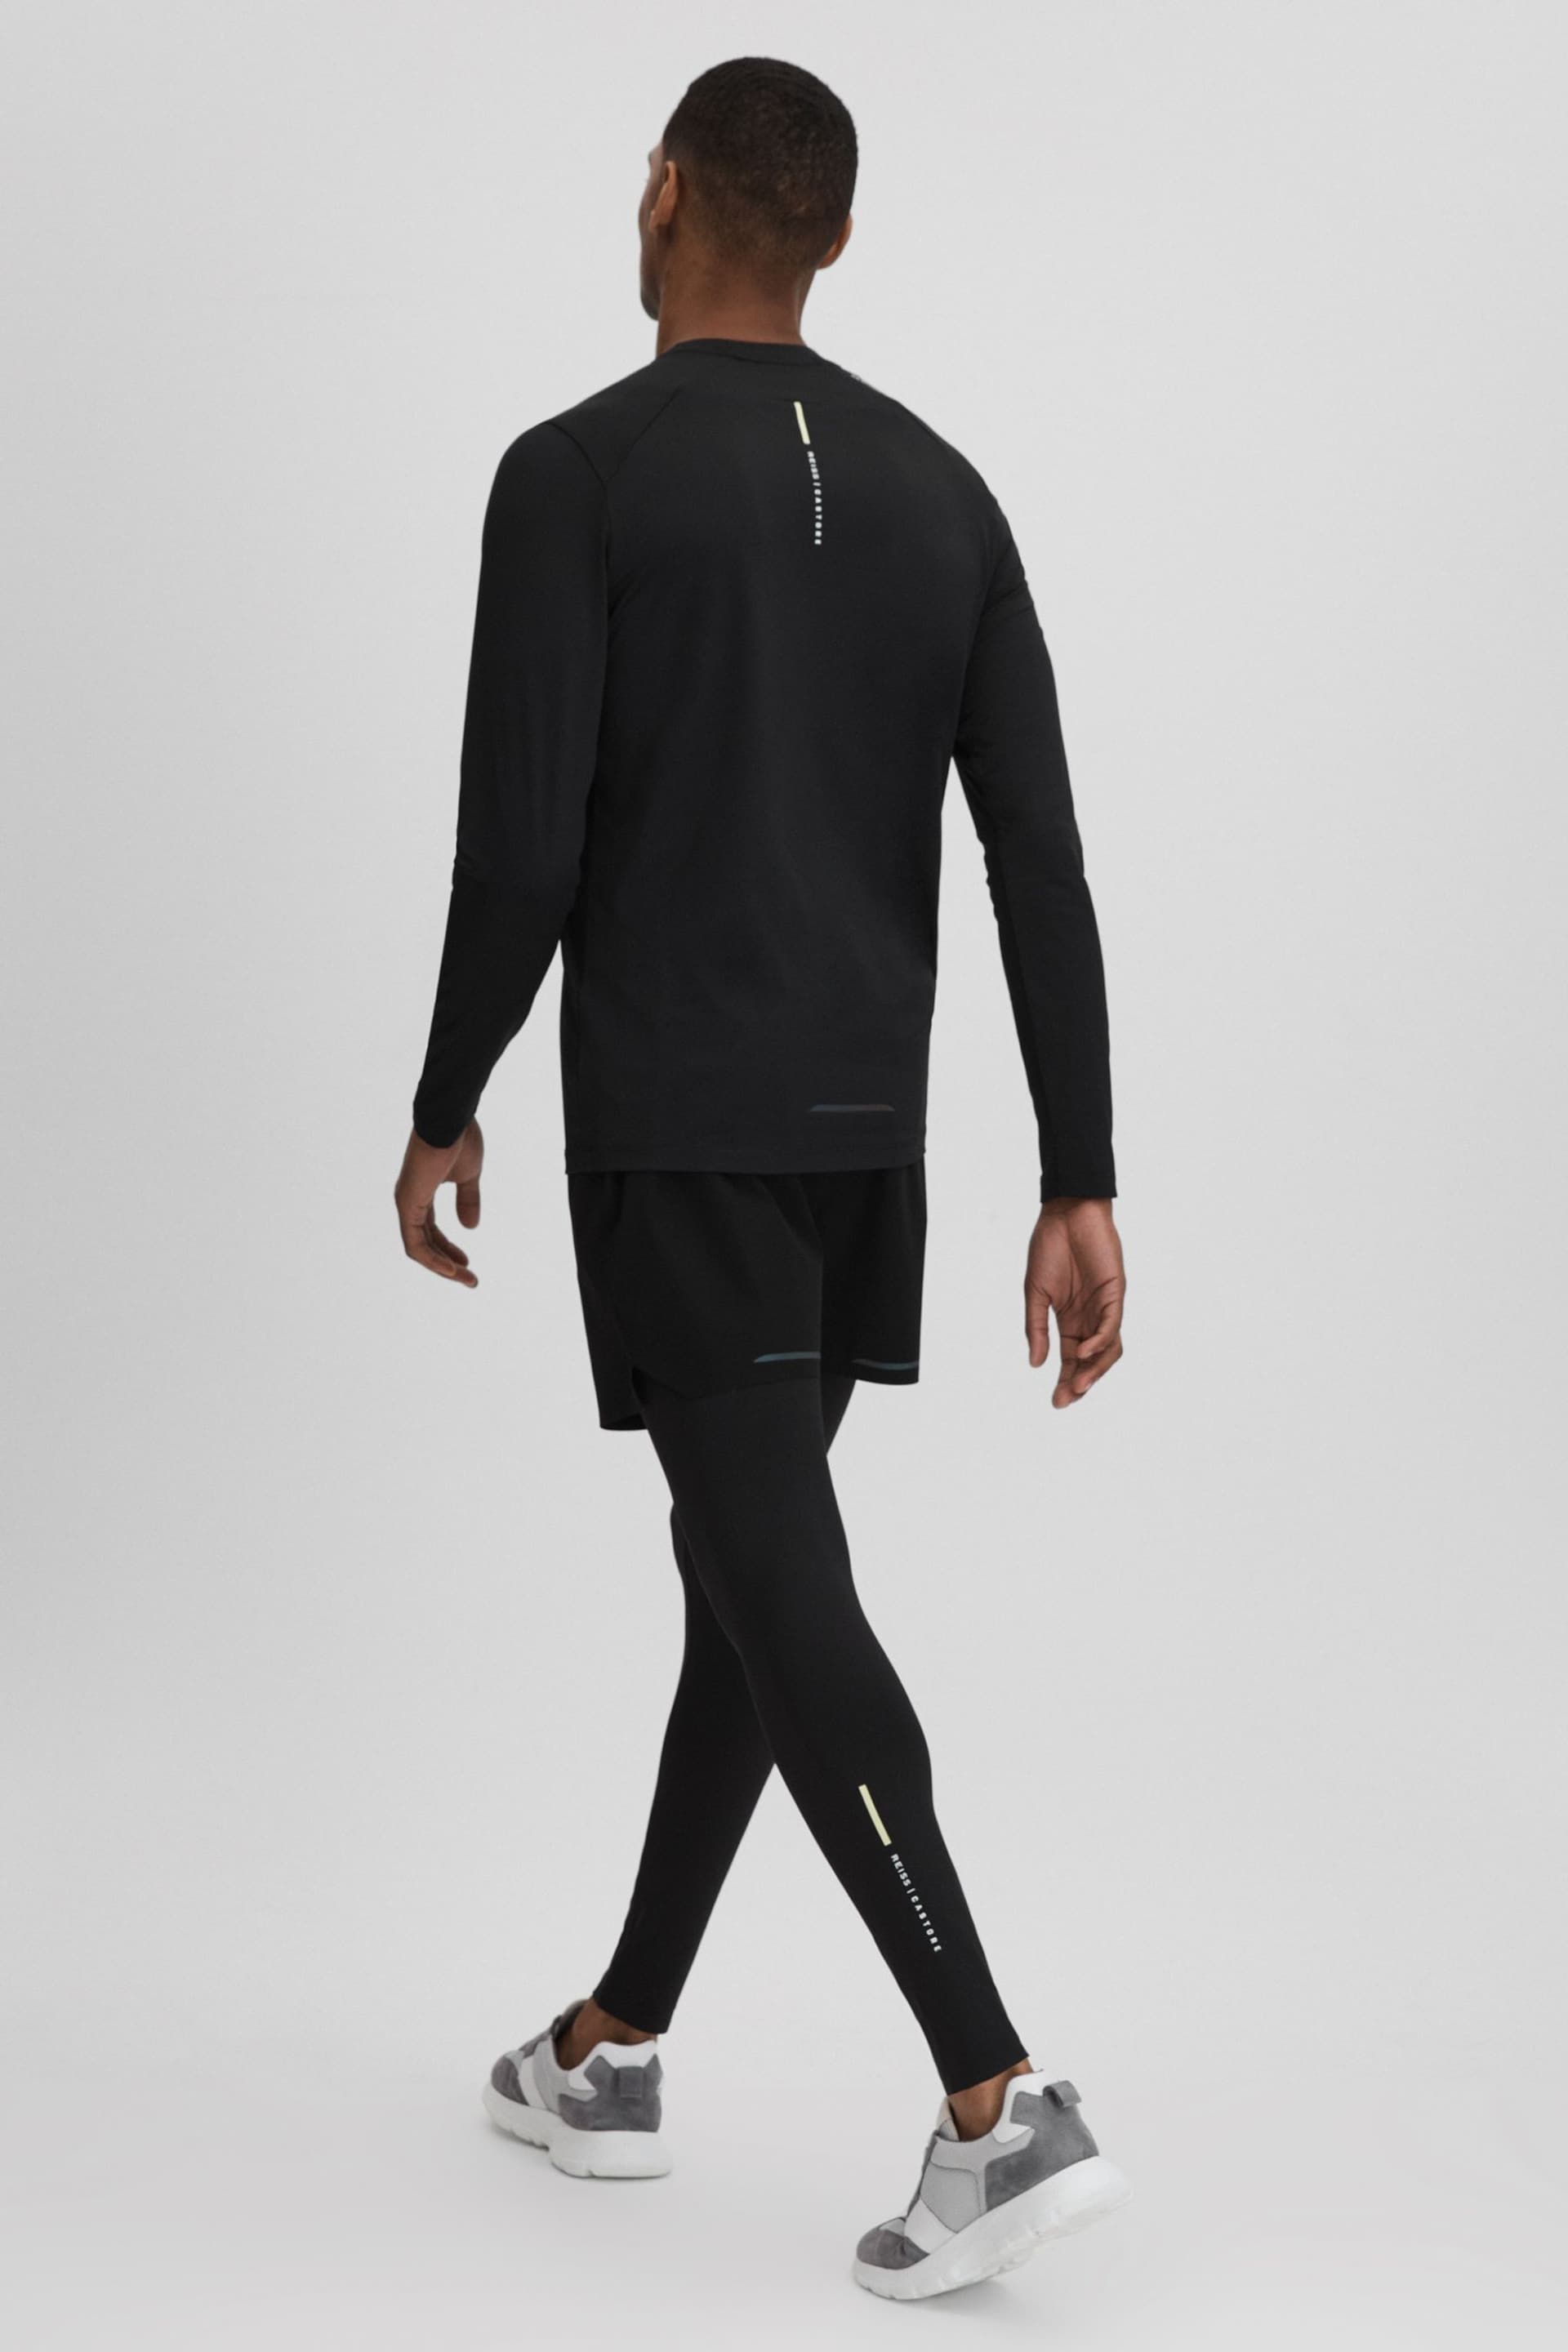 Reiss Onyx Black Holt Castore Performance Tights - Image 7 of 8